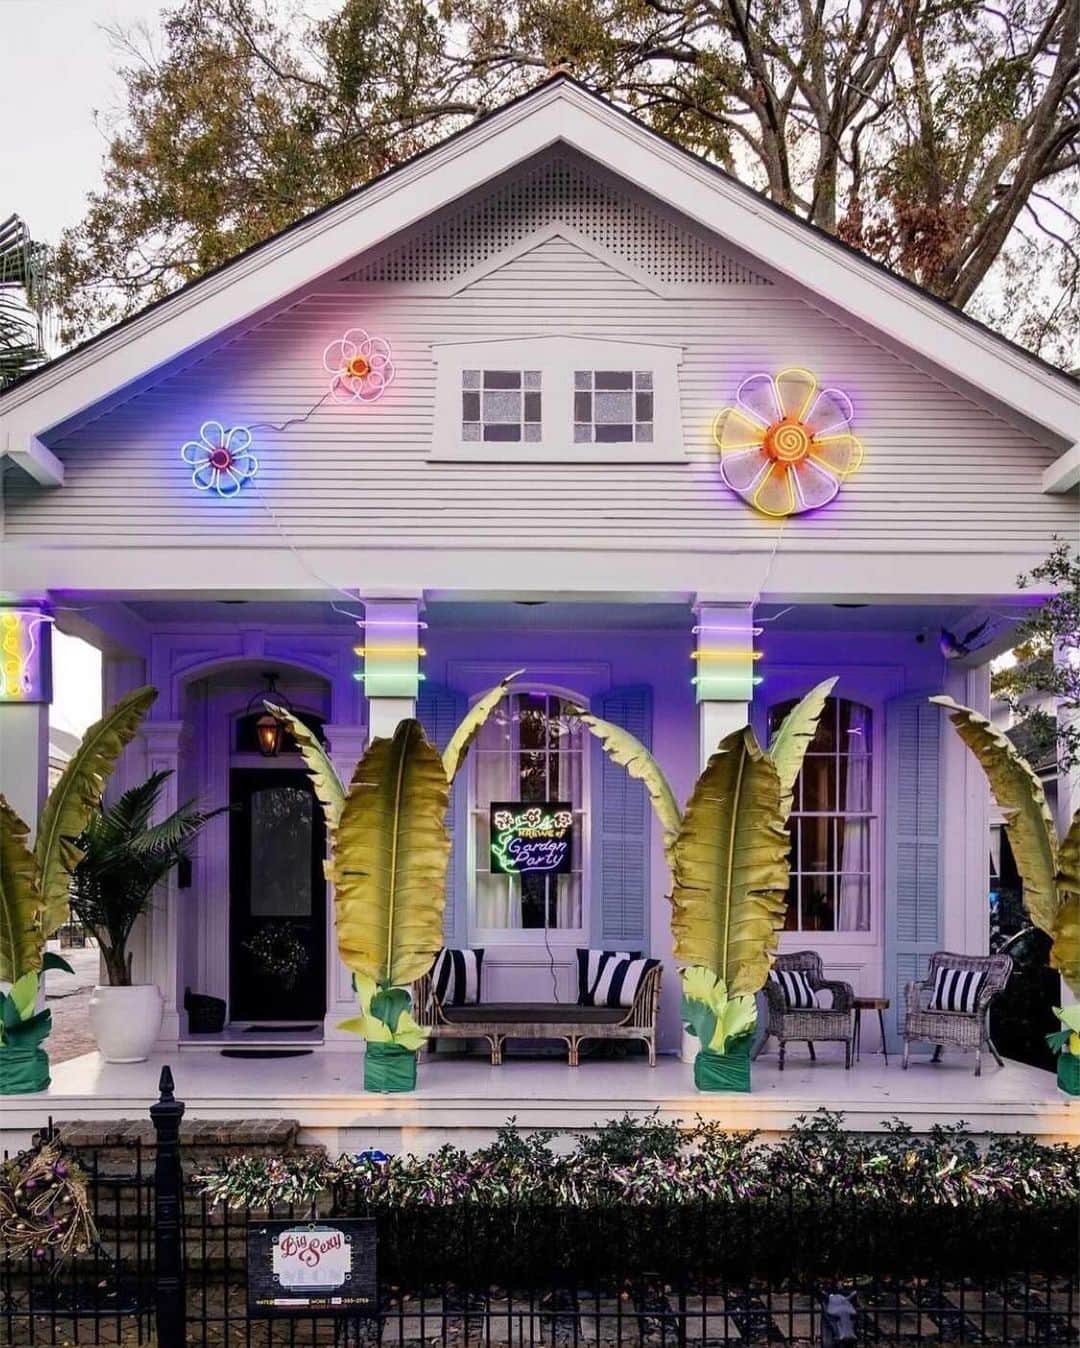 HGTVさんのインスタグラム写真 - (HGTVInstagram)「Laissez les bon temps rouler! ⚜️ Mardi Gras season in New Orleans looks a little different this year. 📸  Photographer Laura Steffan (@lsteffan) captures the new tradition of Yardi Gras, and we're feeling the good vibes. 💜 💛 💚⁠⁠ ⁠⁠ With Mardi Gras parades canceled for 2021, Nola residents are turning their homes into stationary floats to keep the spirit of the season alive. 🎭 Employing the artists behind the build of the city's usual parade floats, Yardi Gras brings the magic of the season to neighborhoods all across the city. 🥳 ⁠⁠ ⁠⁠ Swipe through for inspiration on your own Mardi Gras decor and follow @lsteffan for more Big Easy magic in your feed. ✨⁠⁠ ⁠⁠ 1) Following those Parade at Home orders to a T 😍⁠⁠ 2) Custom ball decor from @lousballz 🟣 🟢 🟡⁠⁠ 3) The Night Tripper, honoring Dr. John 🔮✨ @redbeansparade employs Mardi Gras artists to create Yardi Gras goodness ⁠⁠ 4 & 5) @redbeansparade’s The Queen’s Jubilee on iconic St. Charles Avenue 🚋 ✨⁠⁠ 6) All in favor of the house floats being a year-round thing, say weh! 🌸 🌼⁠⁠ 7) All hail the Krewe of Garden Party 👑 🌿 🌸  @bigsexyneon⁠⁠ 8) @sarahellacole and her family’s first Mardi Gras... they're naturals! 🤩 🐶 ⁠⁠ ⁠⁠ #paradeathome #followyournola #yardigras #neworleans #nola #mardigras #alwaysneworleans #mardigras2021 #kreweofhousefloats」2月3日 2時07分 - hgtv